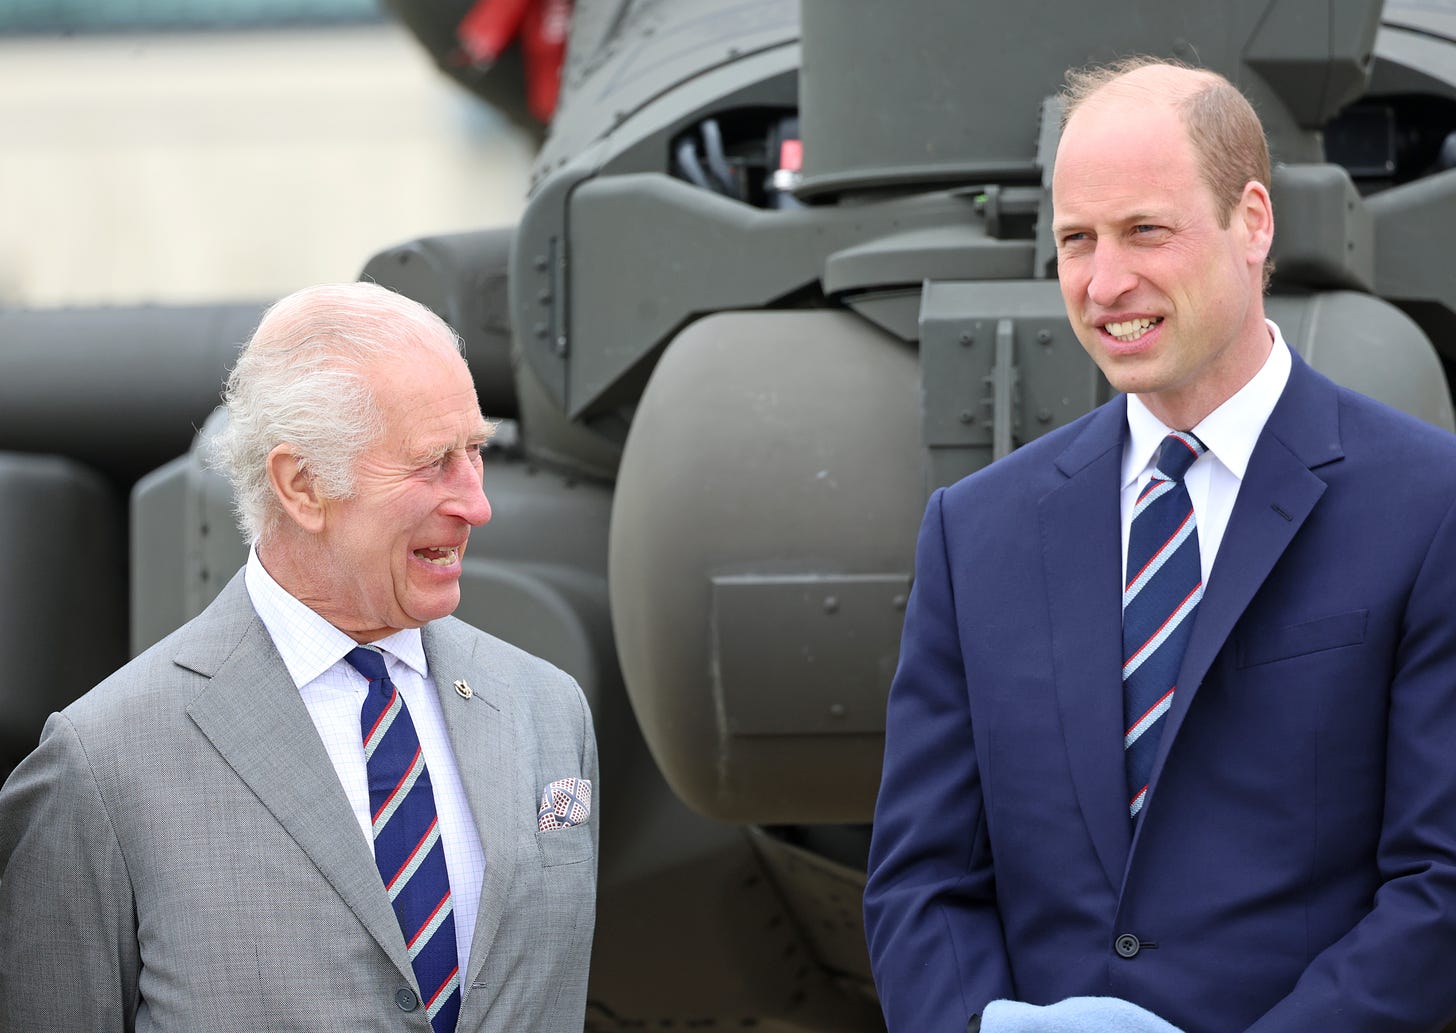 king charles handed over his role of role of Colonel-in-Chief of the Army Air Corps to prince william